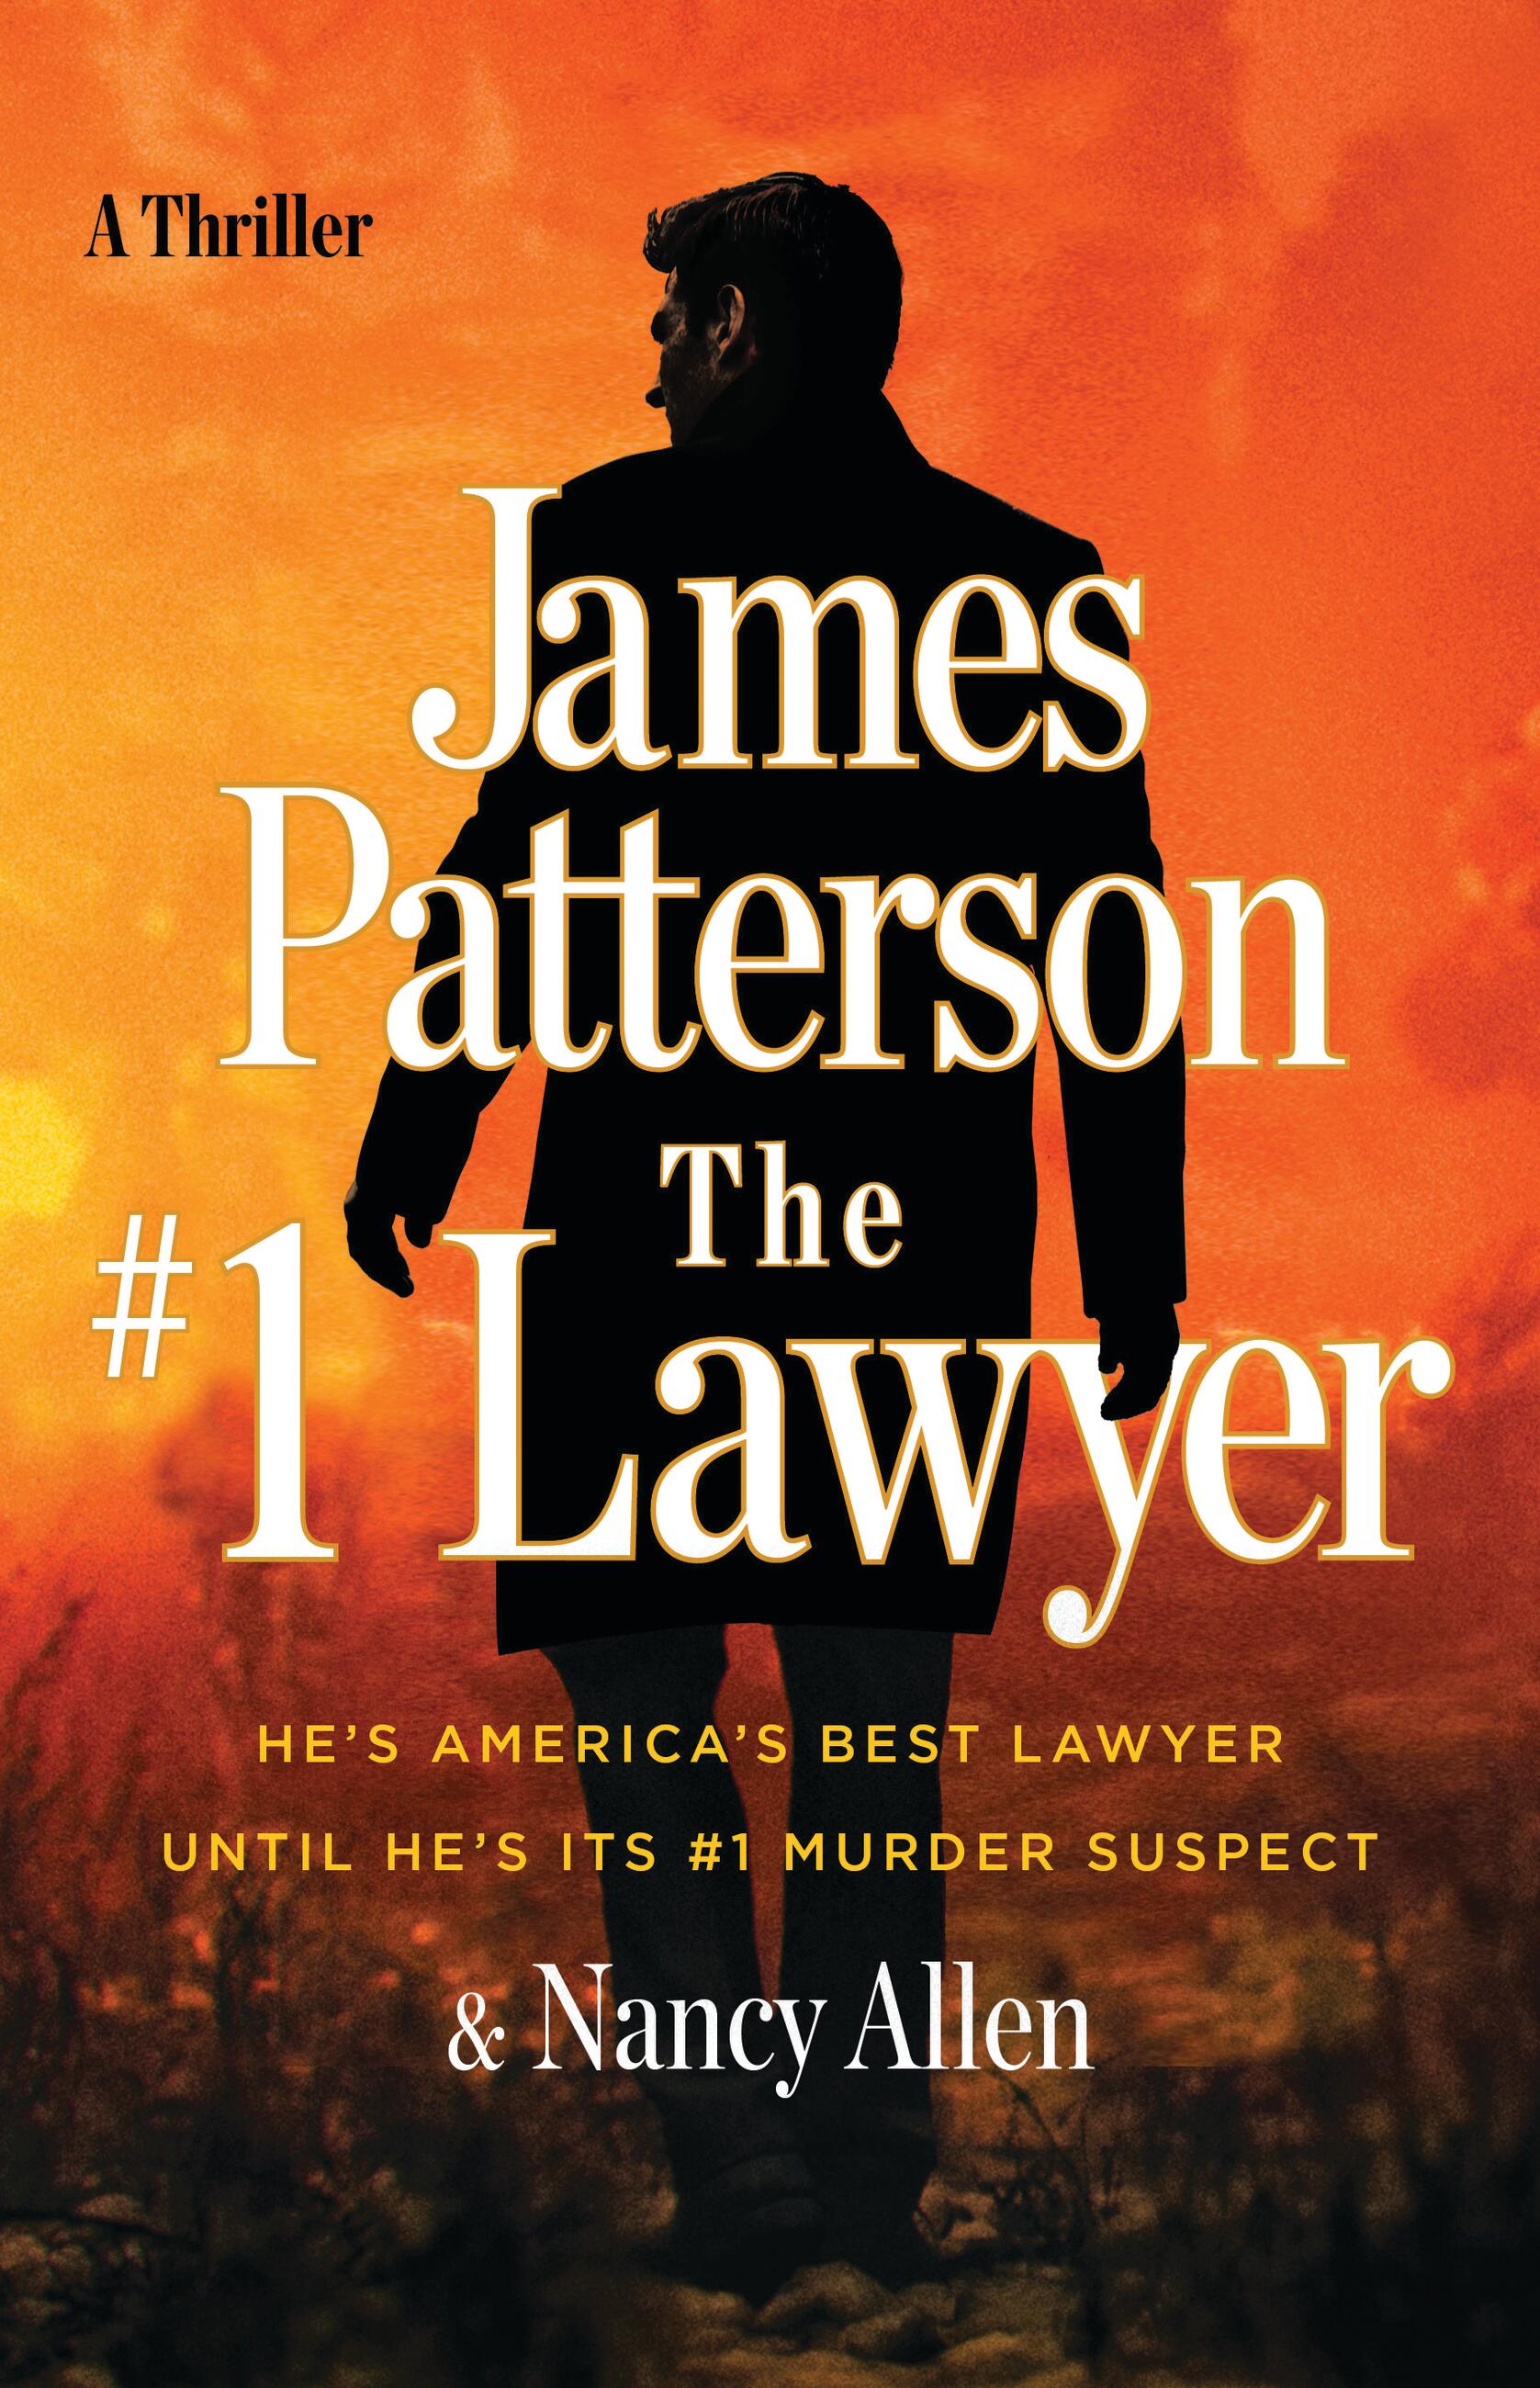 The Number One Lawyer by James Patterson and Nancy Allen